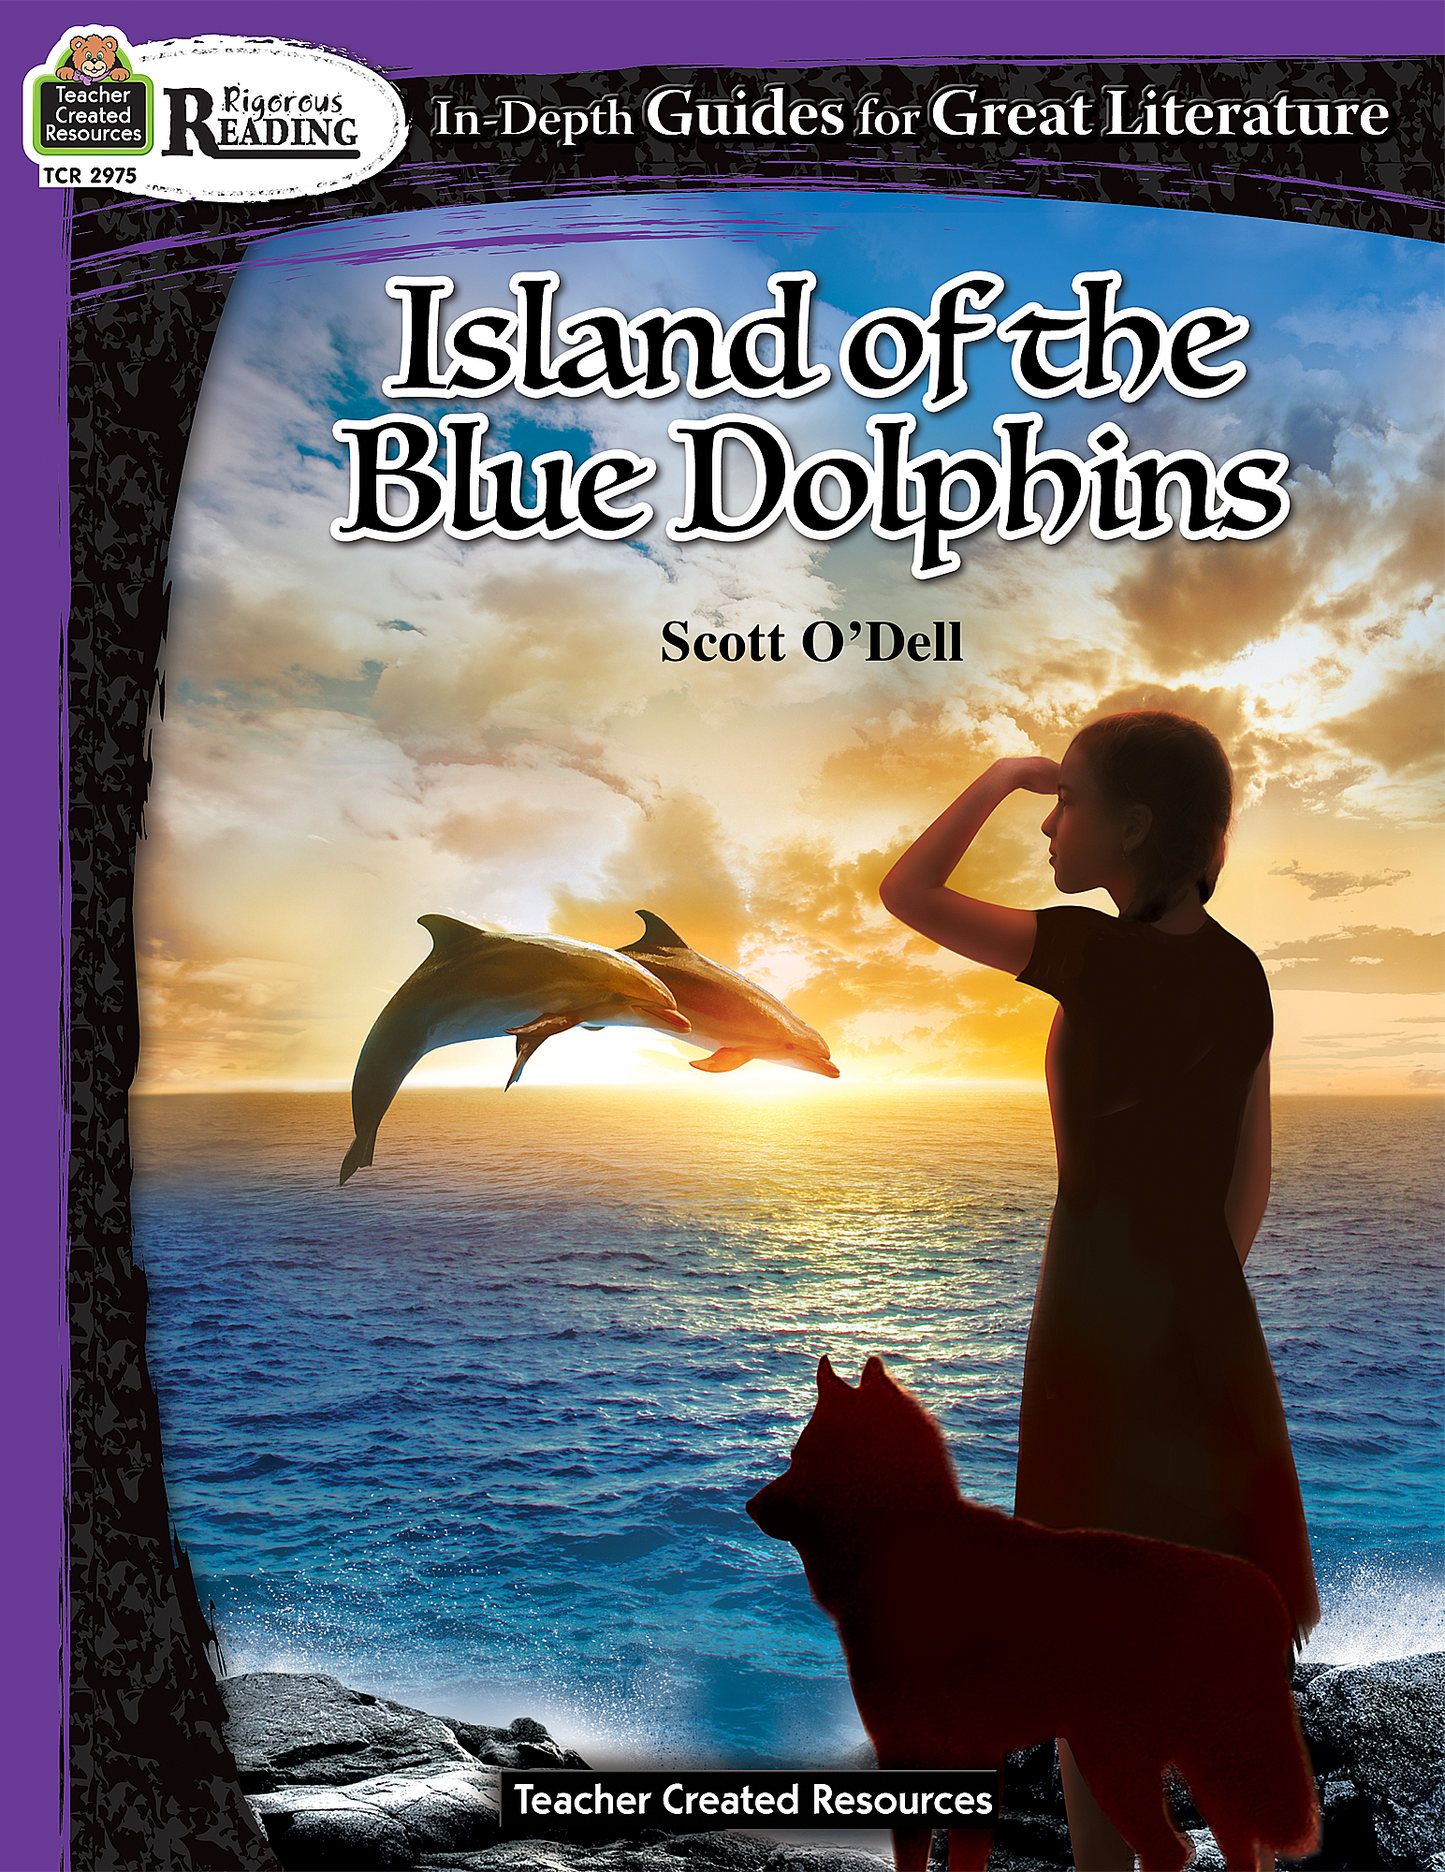 Rigorous Reading: Island of the Blue Dolphins